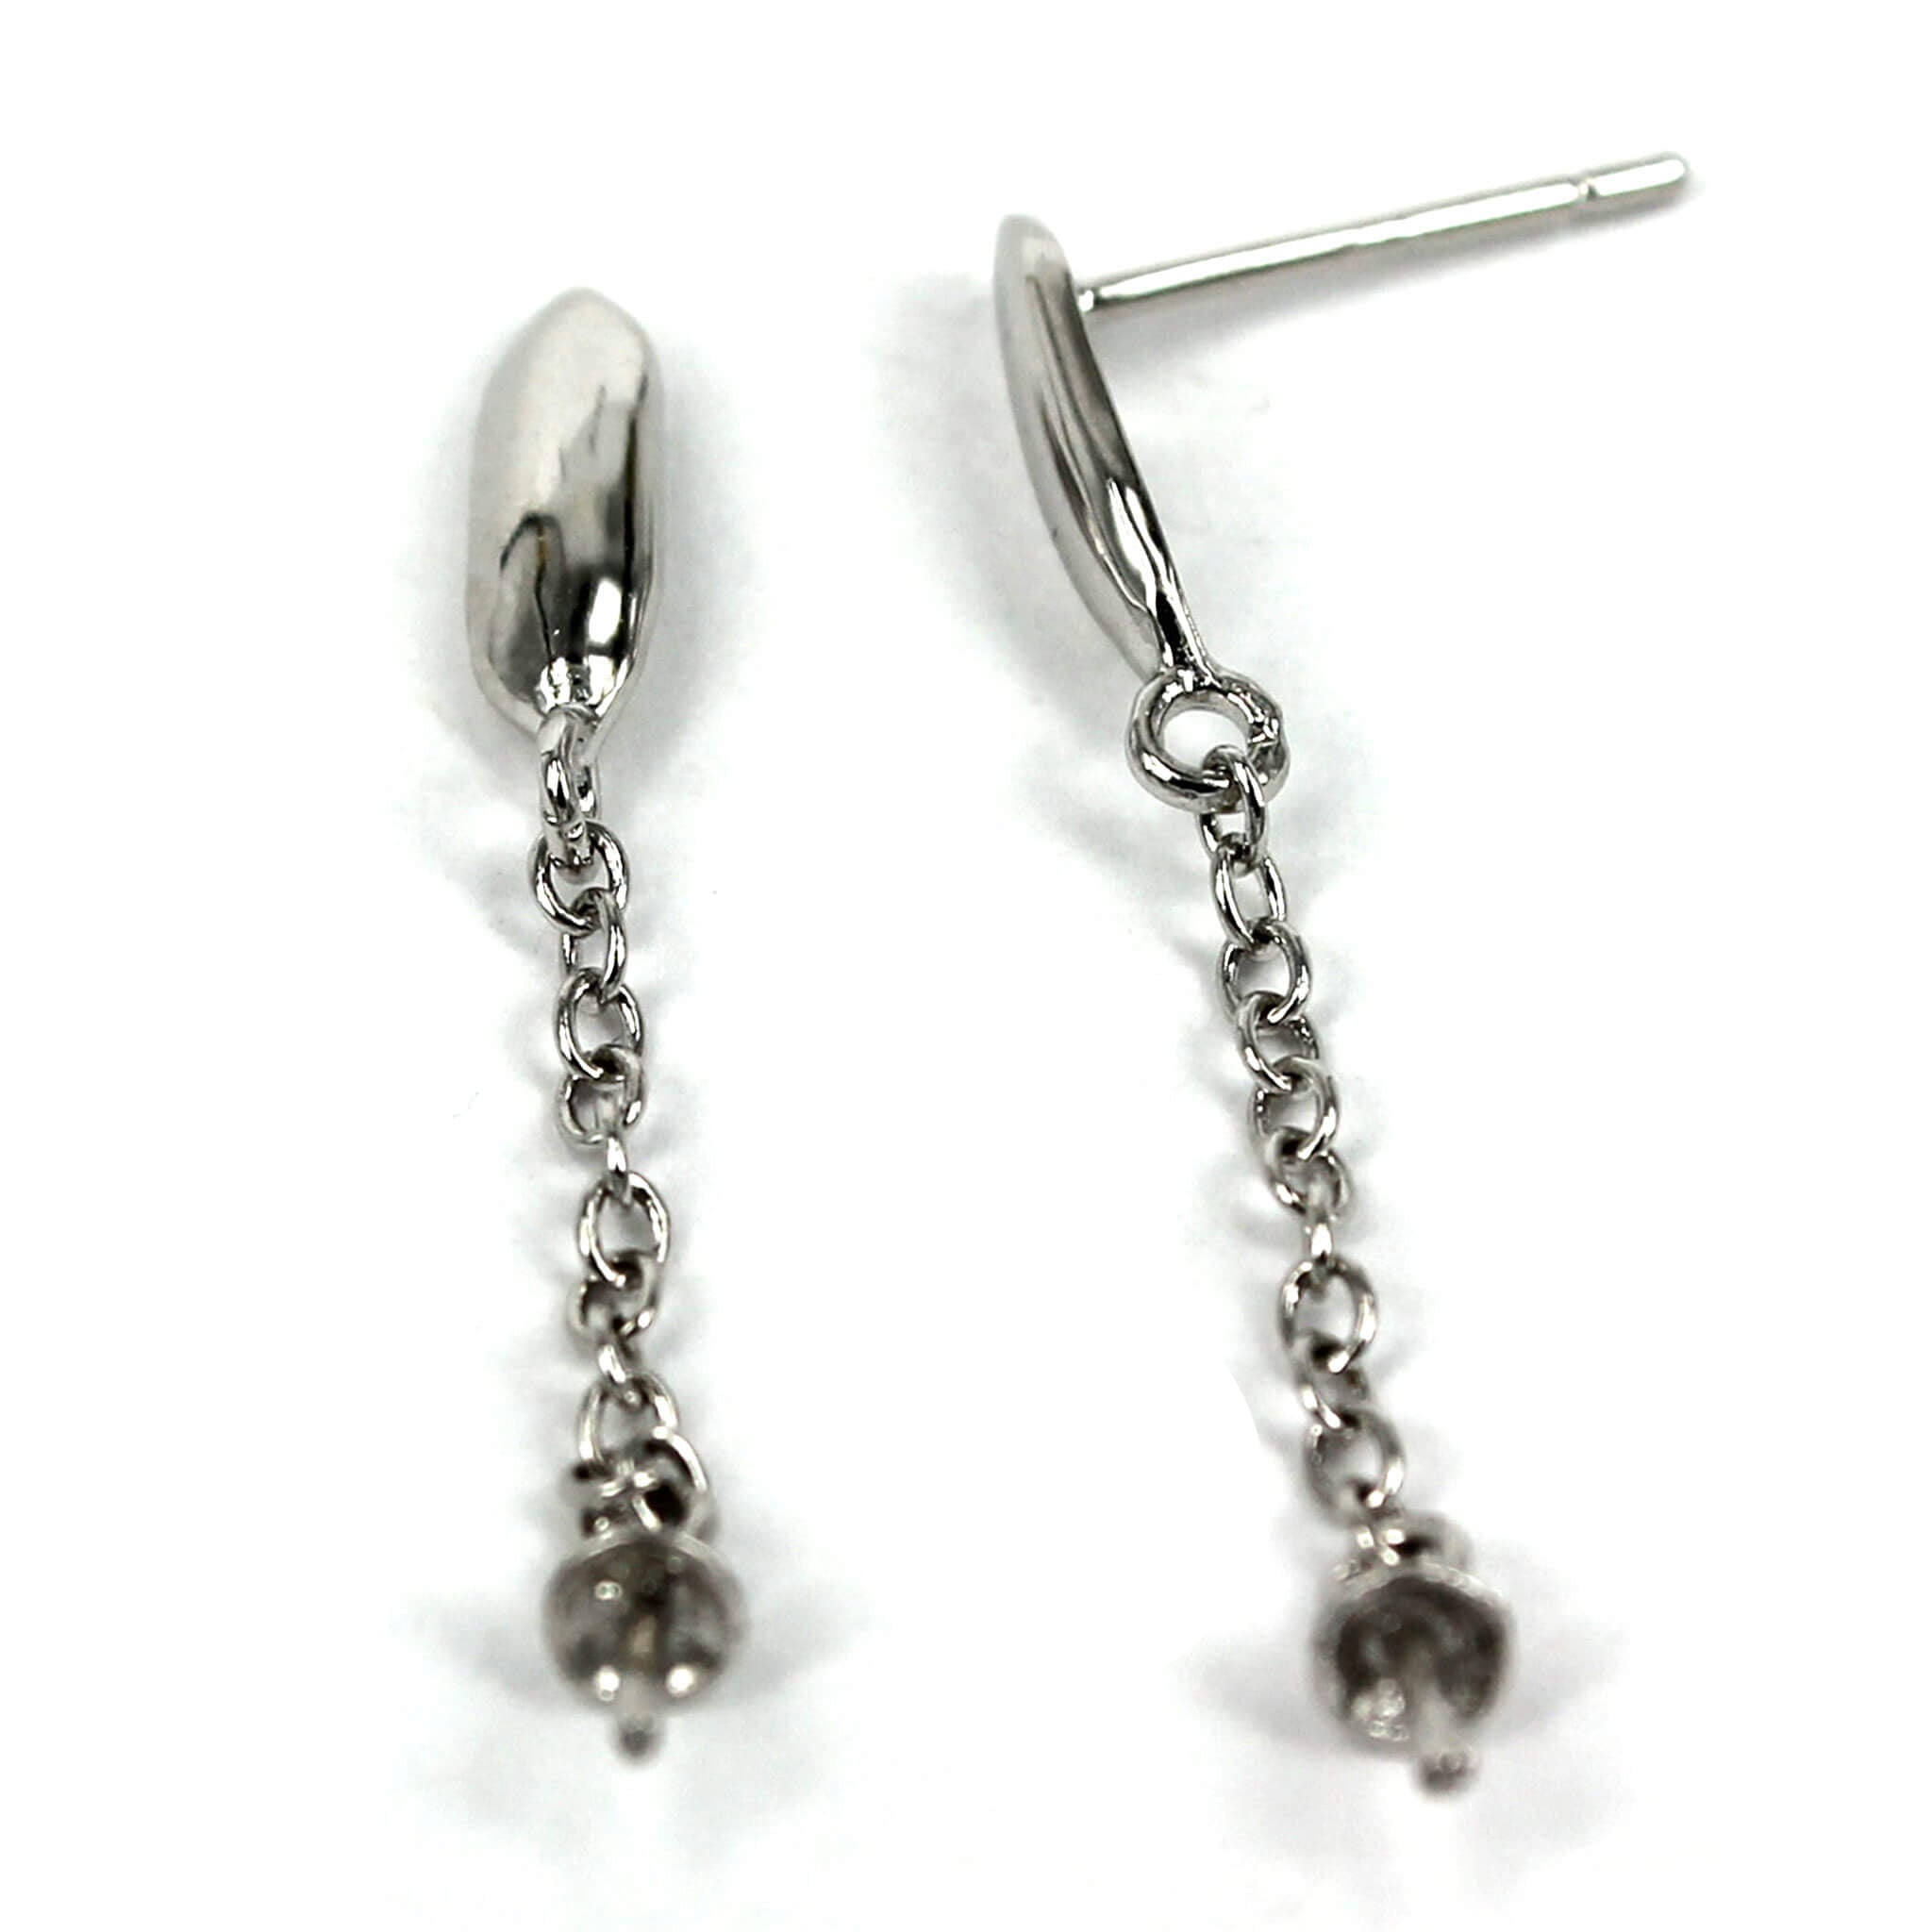 Ear Studs with Cup and Peg Mounting in Sterling Silver 2mm